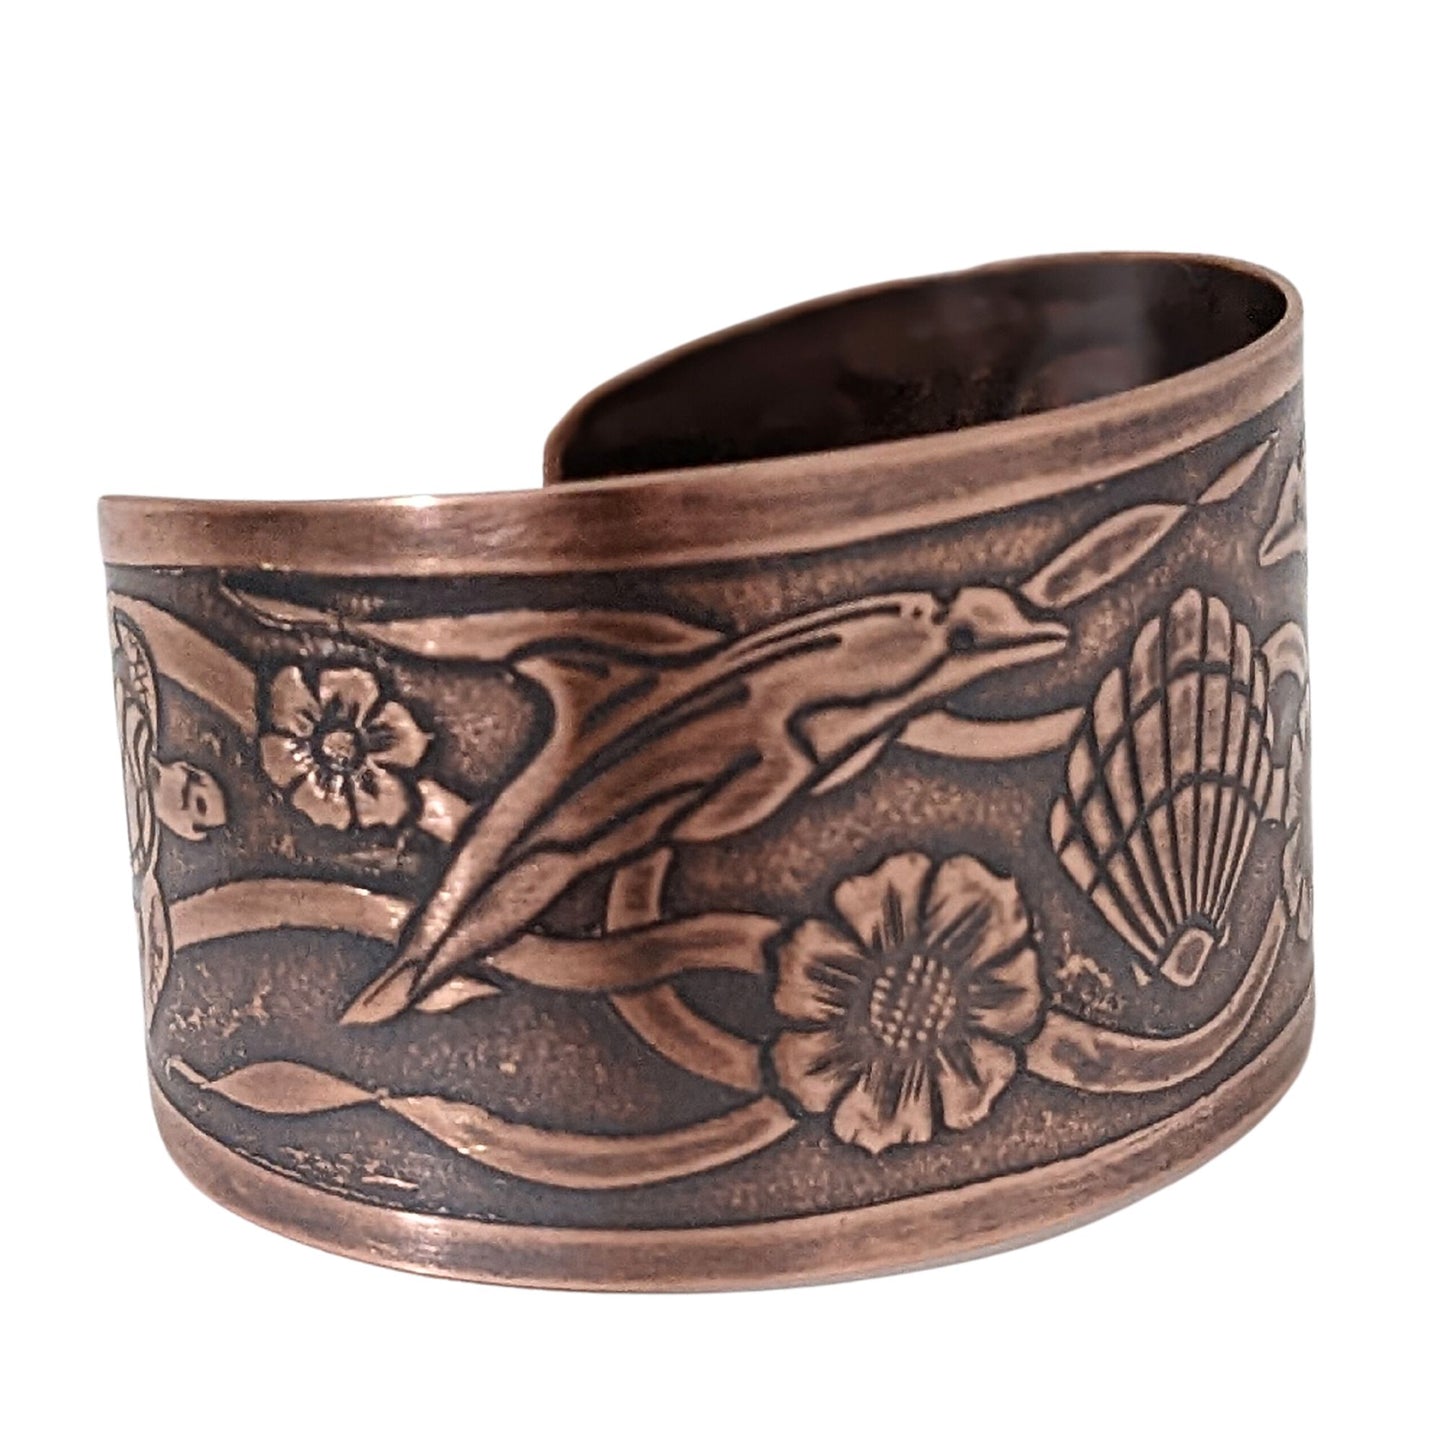 Wide tapered copper cuff bracelet with sea life design. Center is a seashell, with flowers and dolphins on either side.  Toward the ends of the cuff there are turtles, and a seaweed pattern is woven throughout the design.